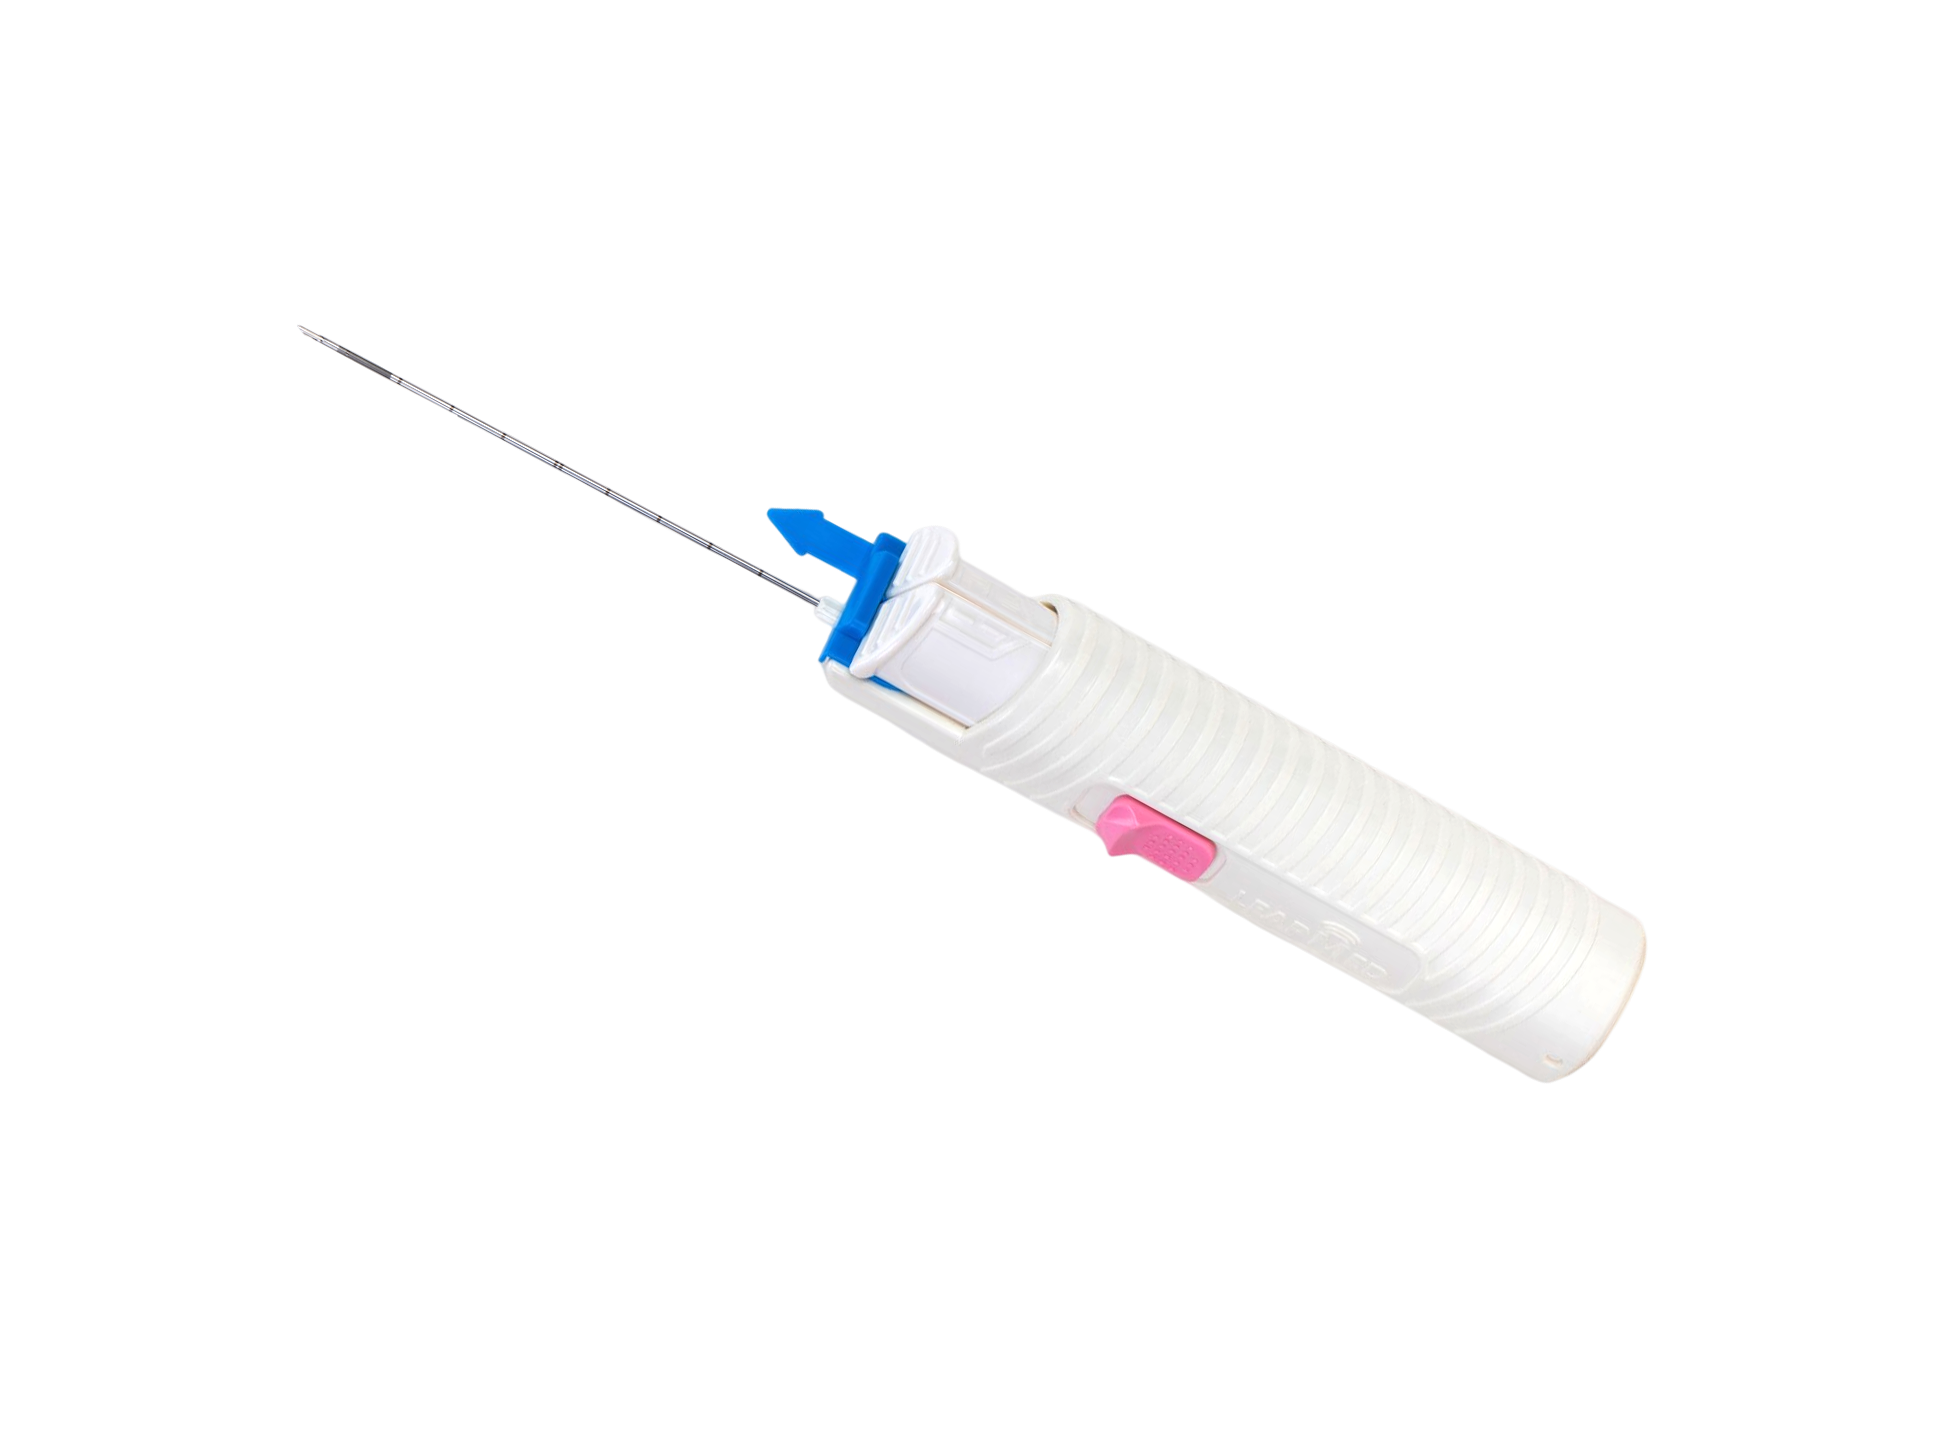 Disposable Automatic Core Biopsy Instrument (GoldenFire)